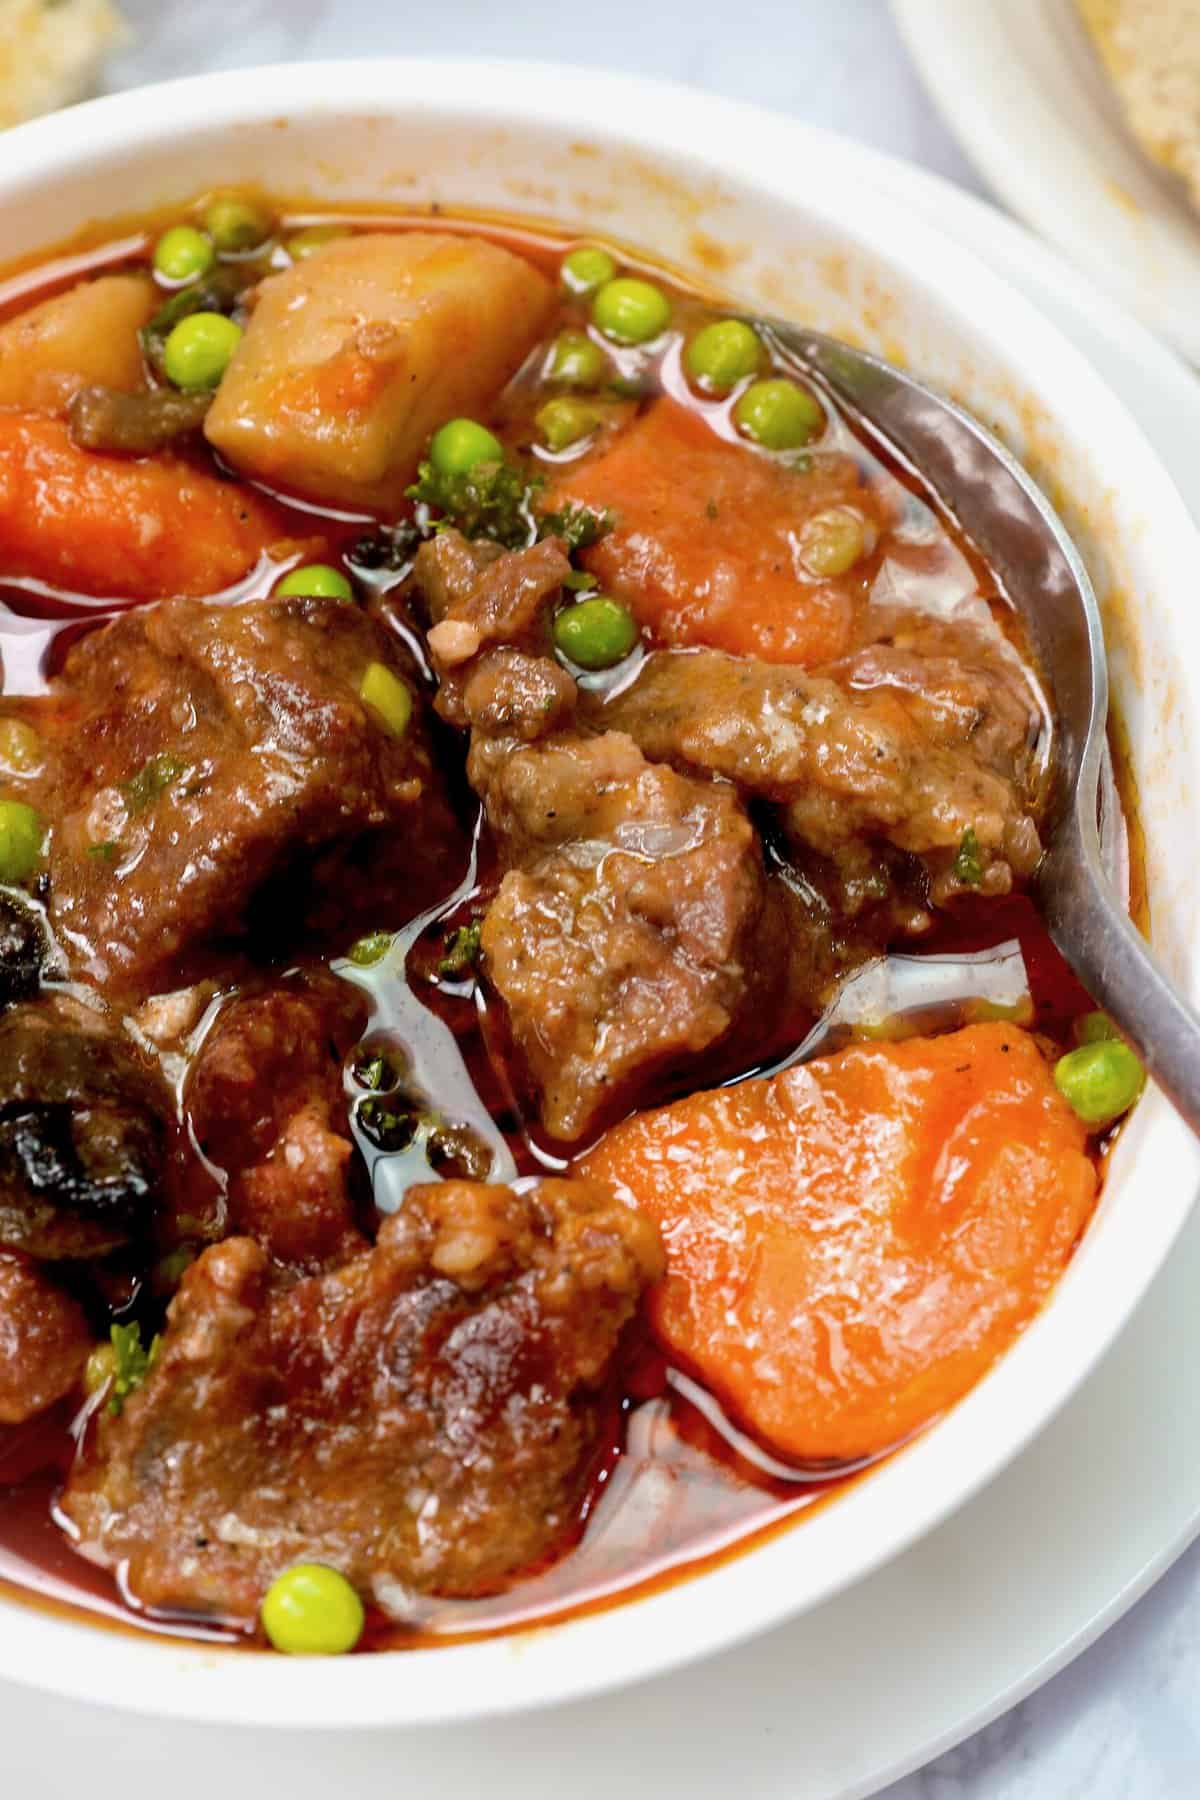 Serving up a fresh bowl of soul-satisfying slow cooker lamb stew